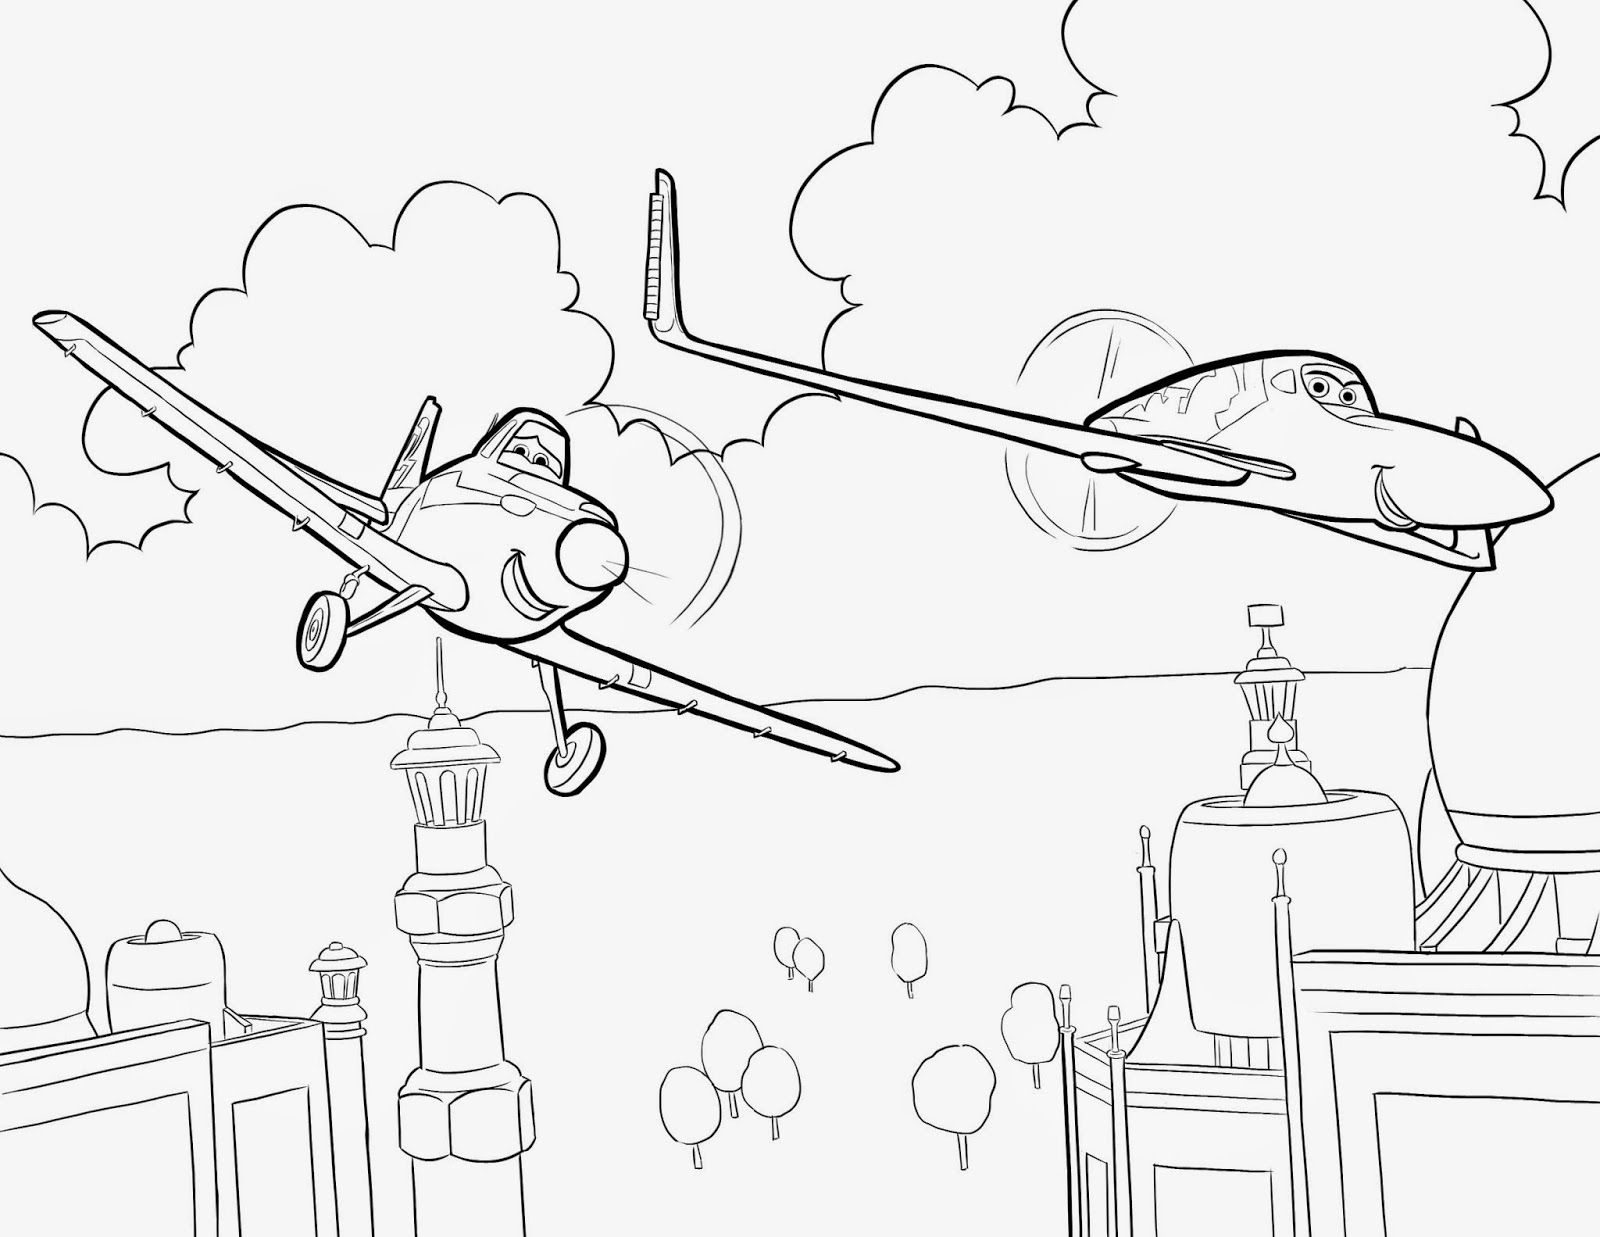 Coloring Pages: Disney Planes Coloring Pages Free and Printable